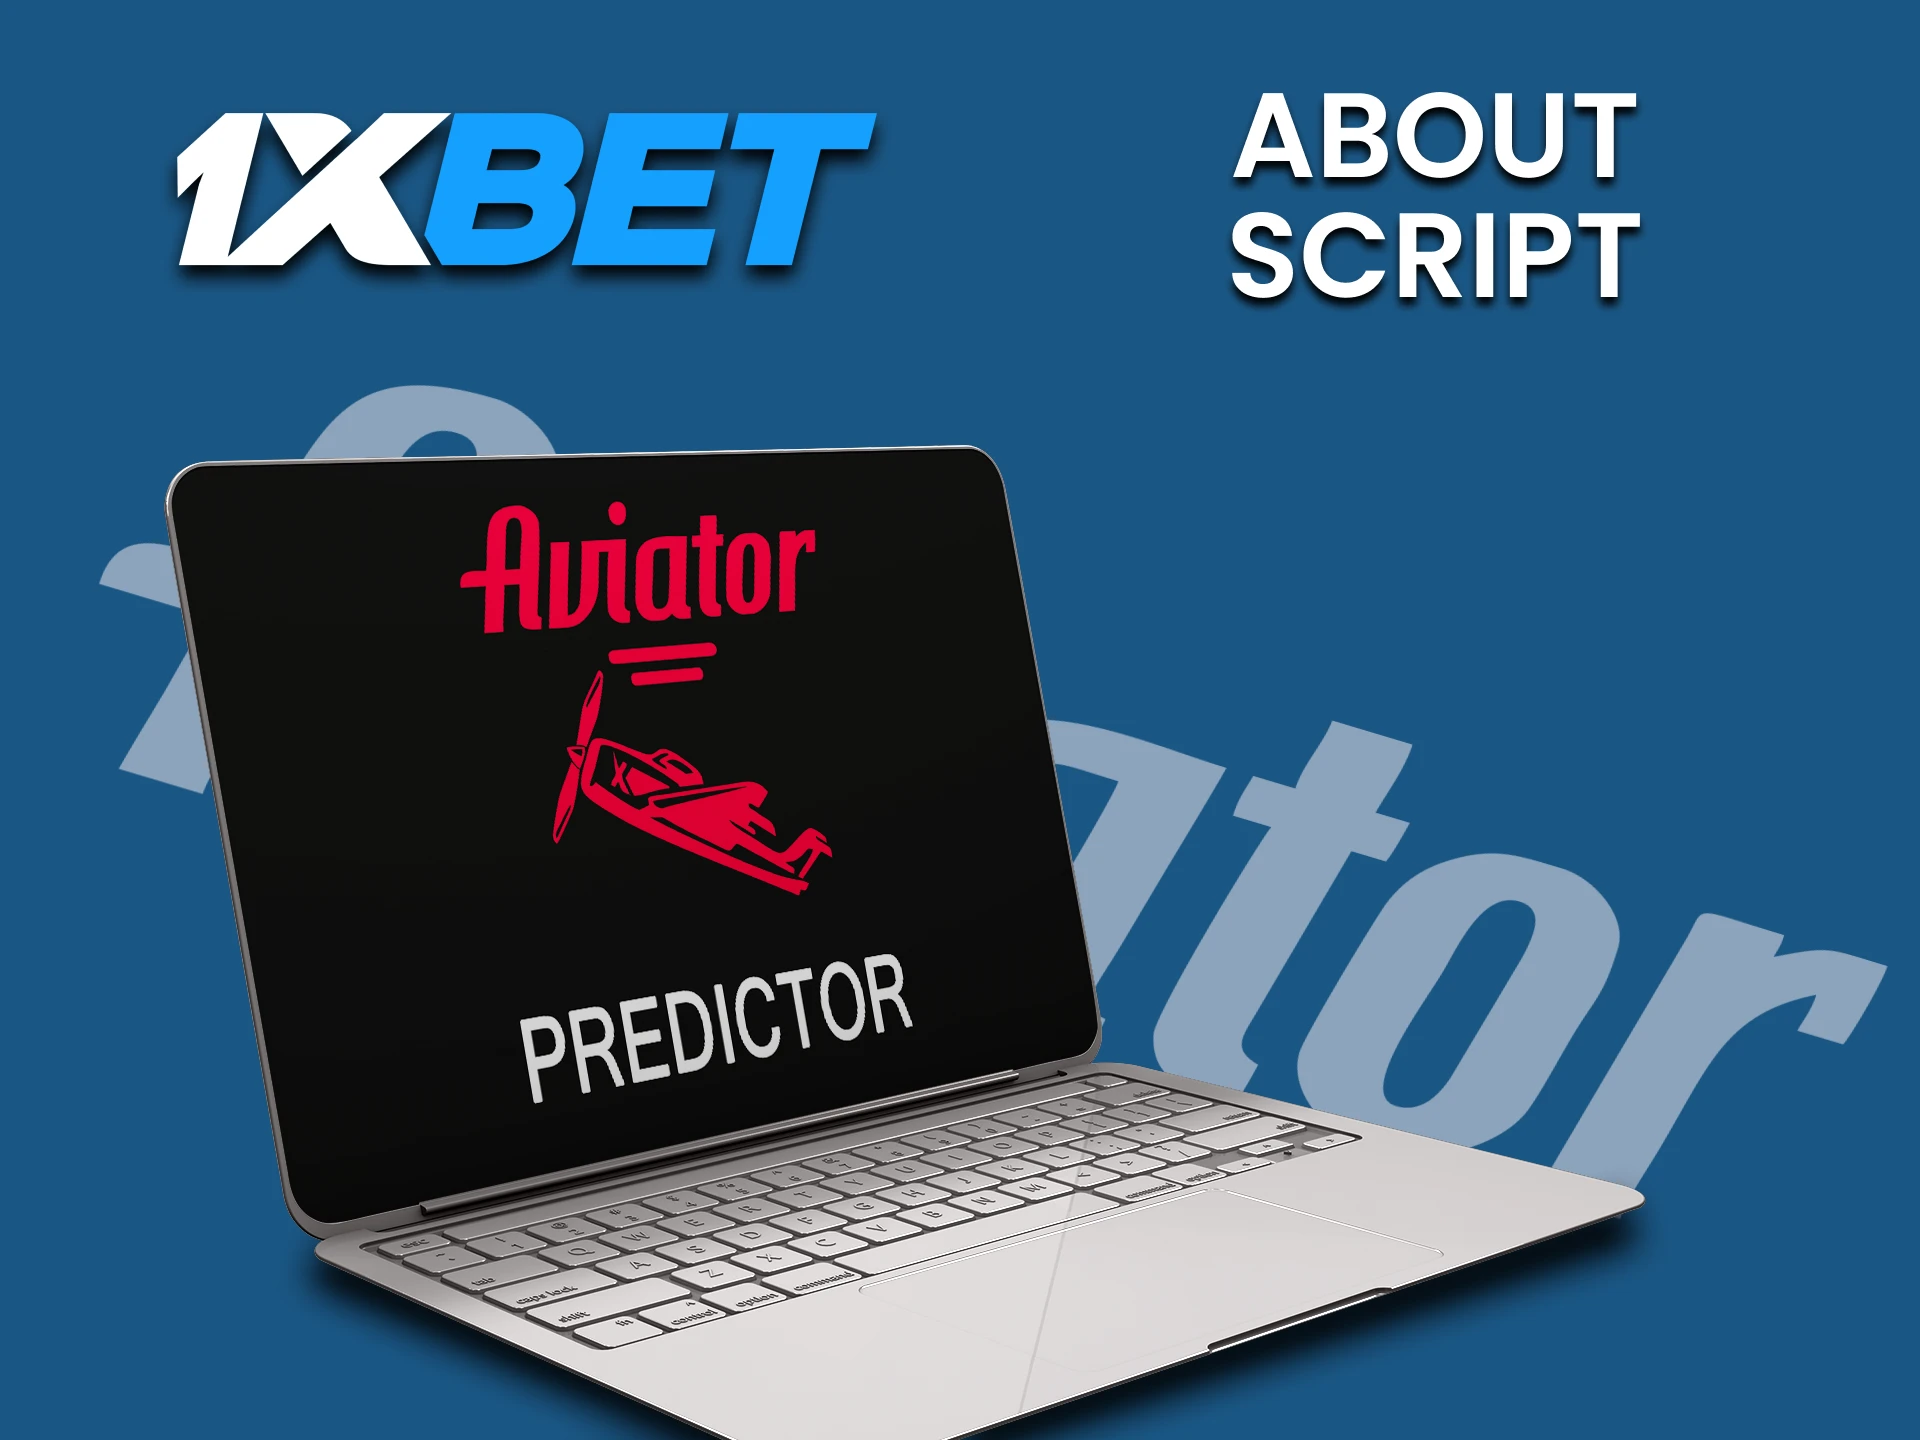 We will tell you whether it is possible to hack the Aviator game on the 1xbet website.